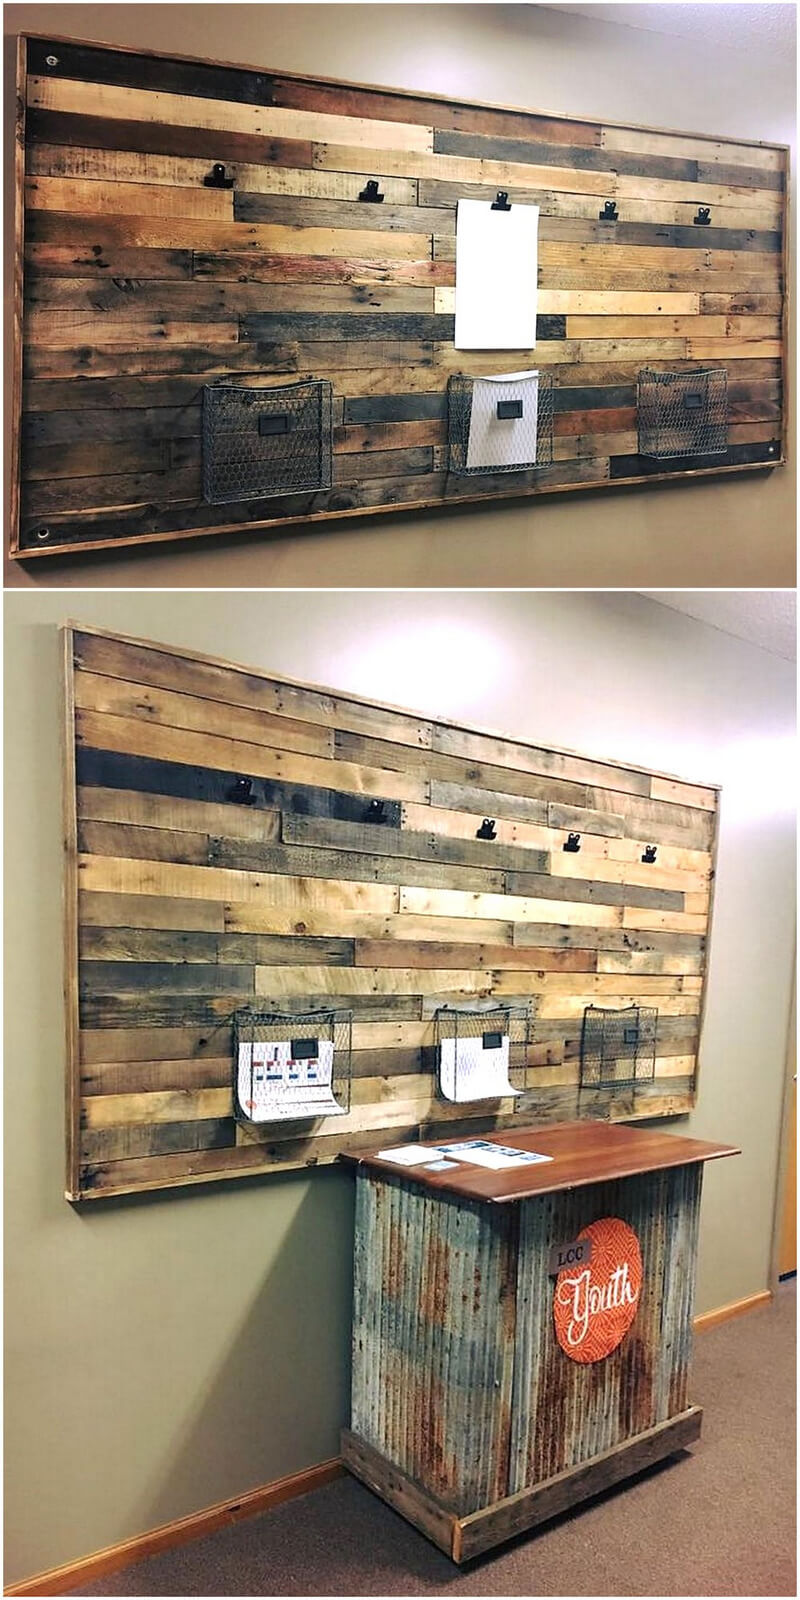 pallets wood newsletter, notice display wall rack